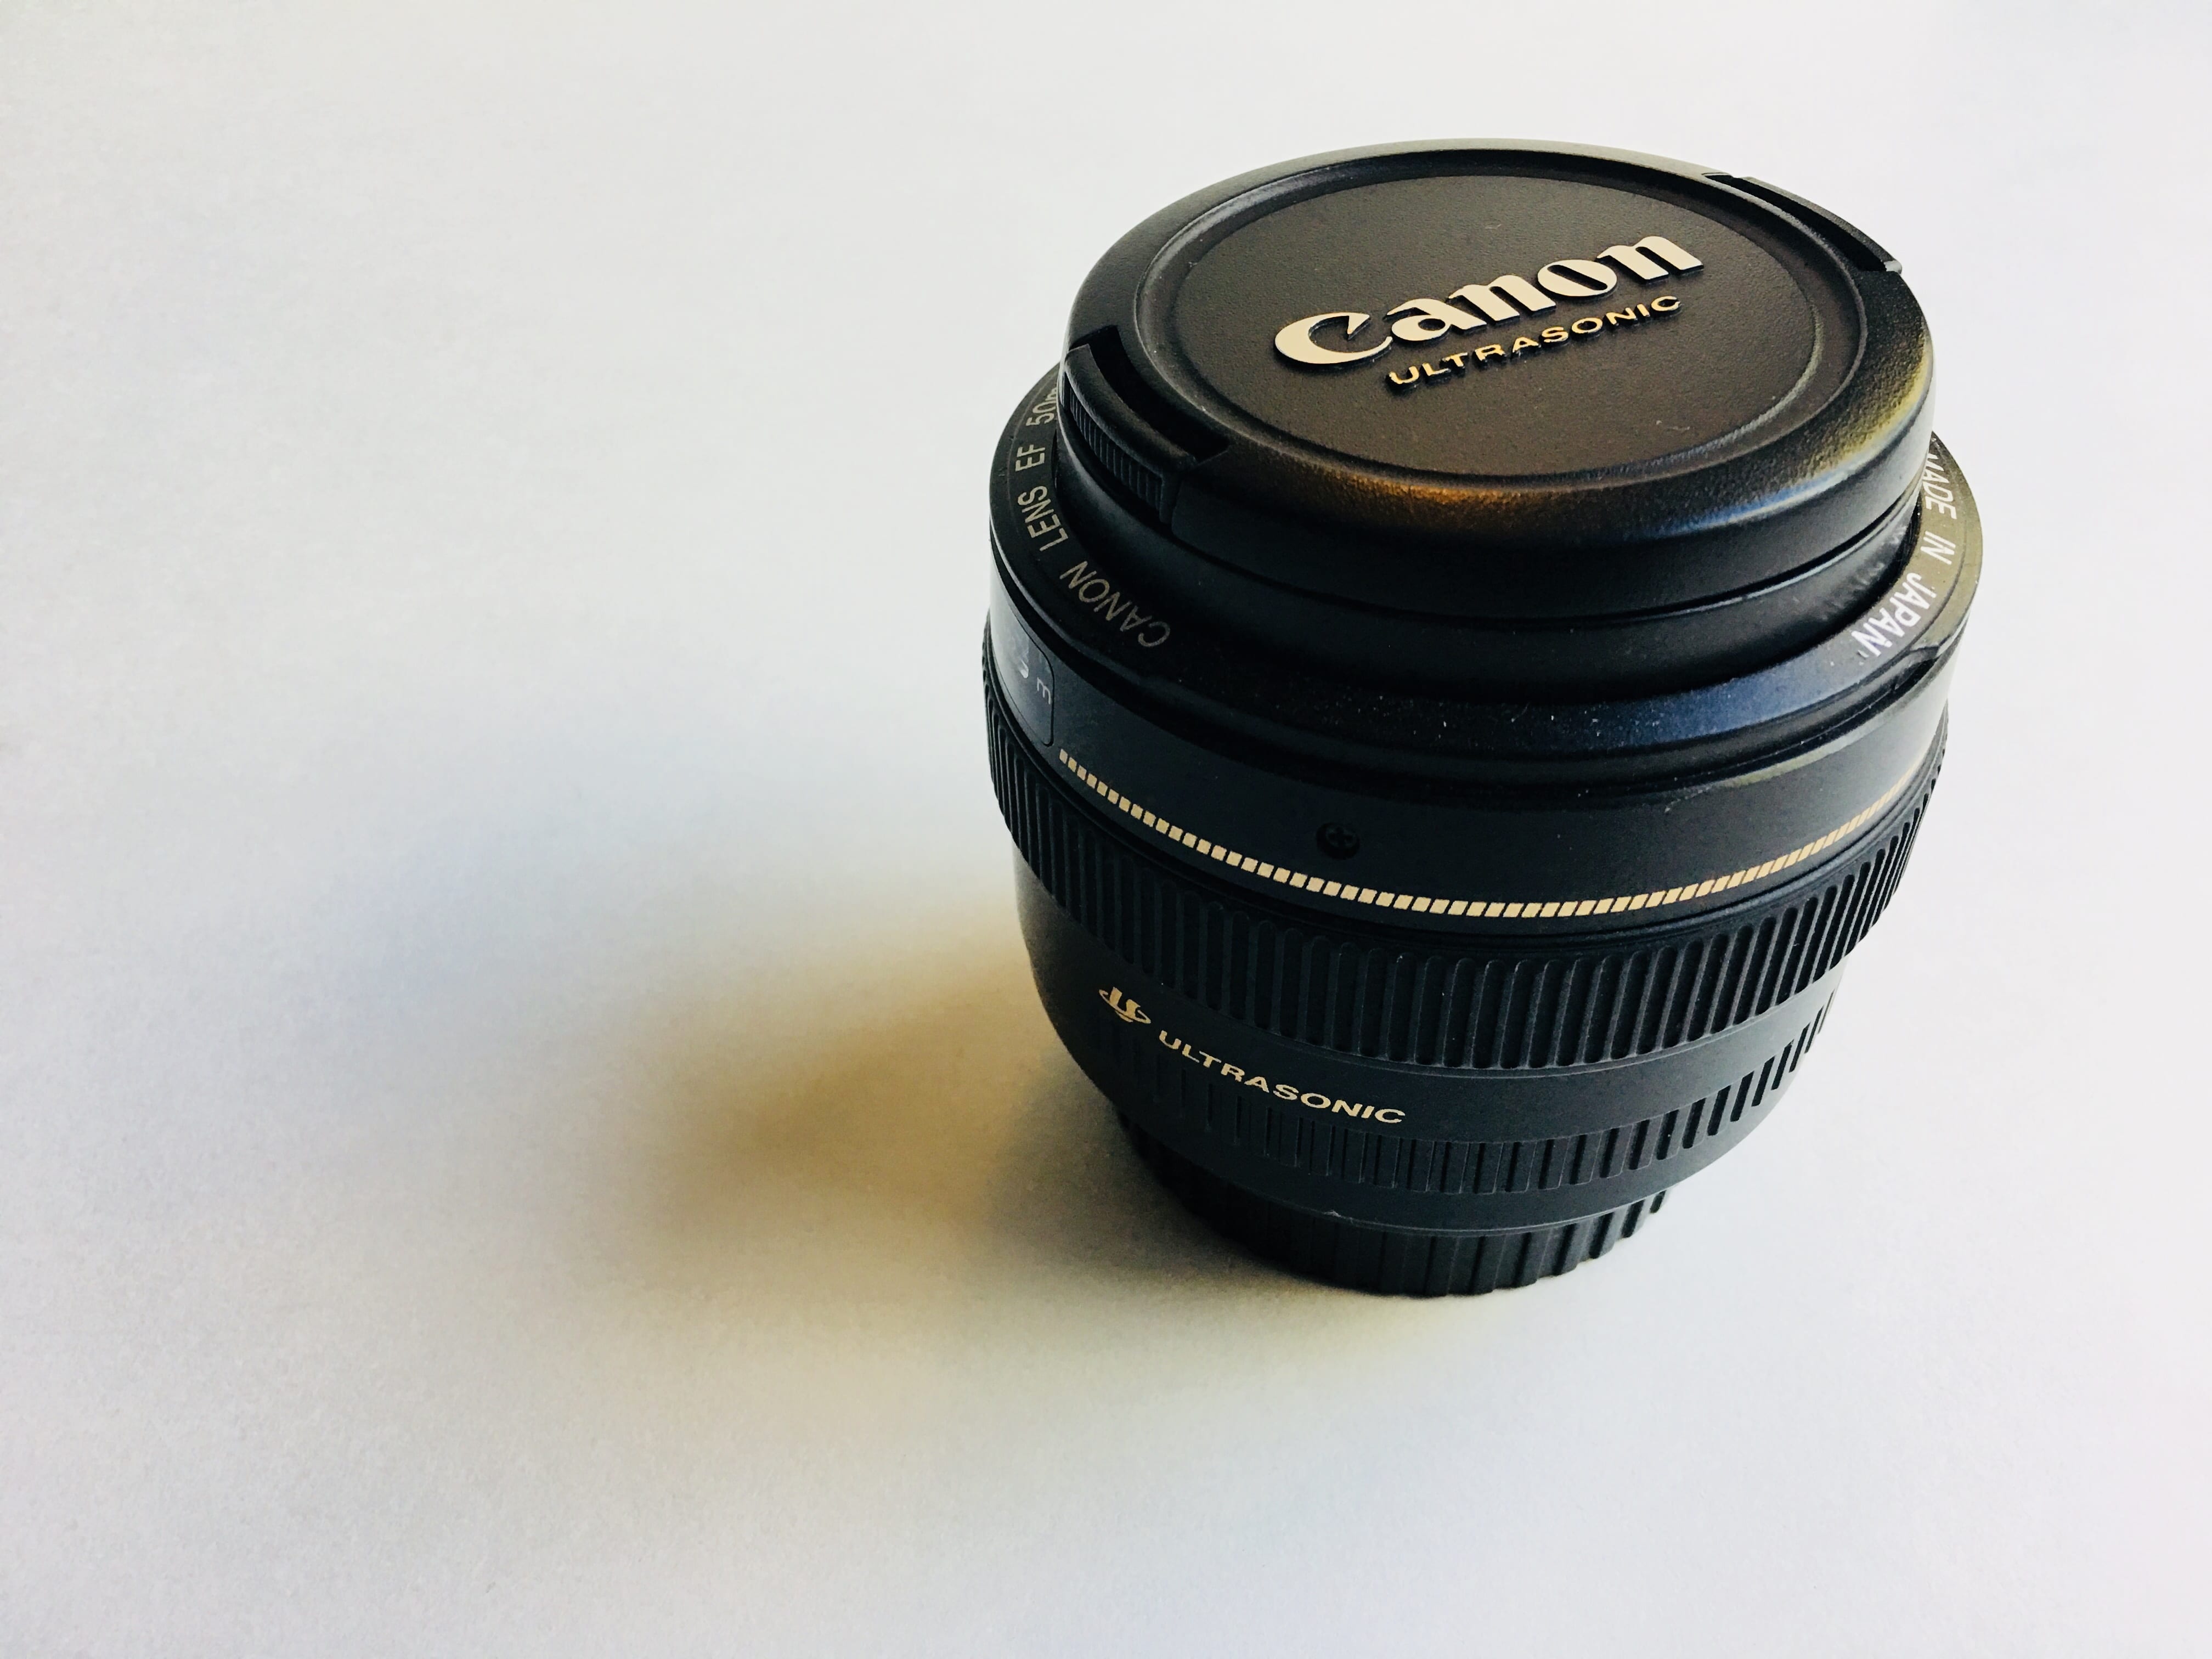 Review of the 50mm 1.4 lens